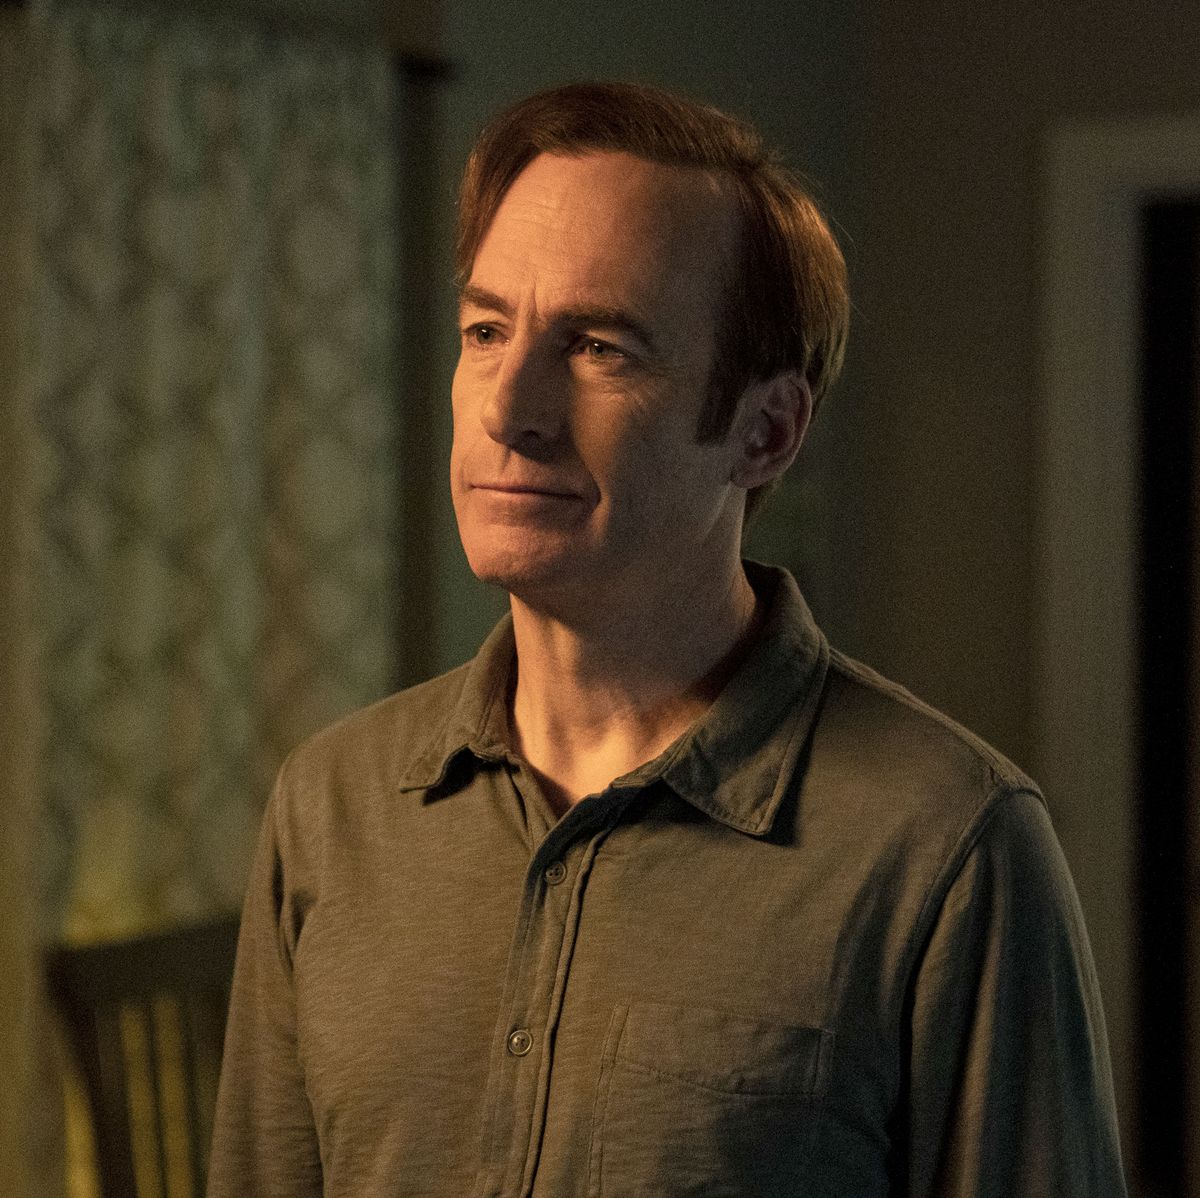 Better Call Saul' Has Won Zero Emmys. That's a Good Thing.